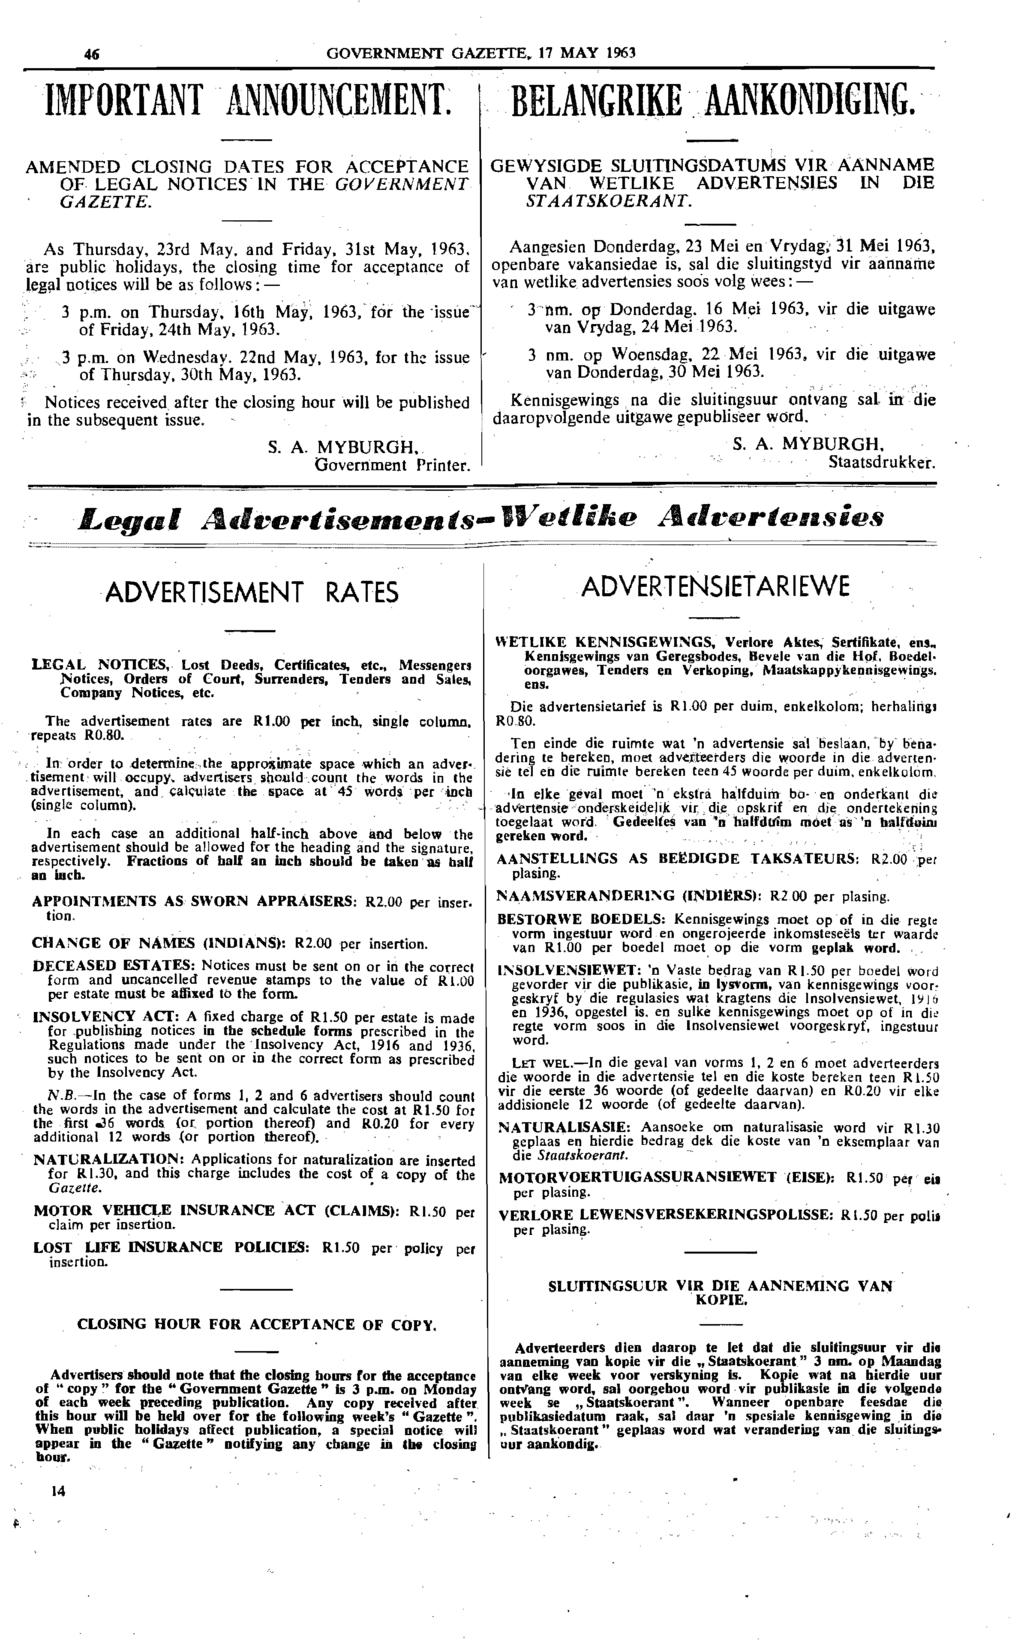 46 IMPORTANT ANNOUNCEMENT. AMENDED CLOSING DATES FOR ACCEPTANCE OF LEGAL NOTICES IN THE GOVERNMENT GAZETTE. As Thursday, 23rd May. and Friday, 31st May, 1963. are public holidays.